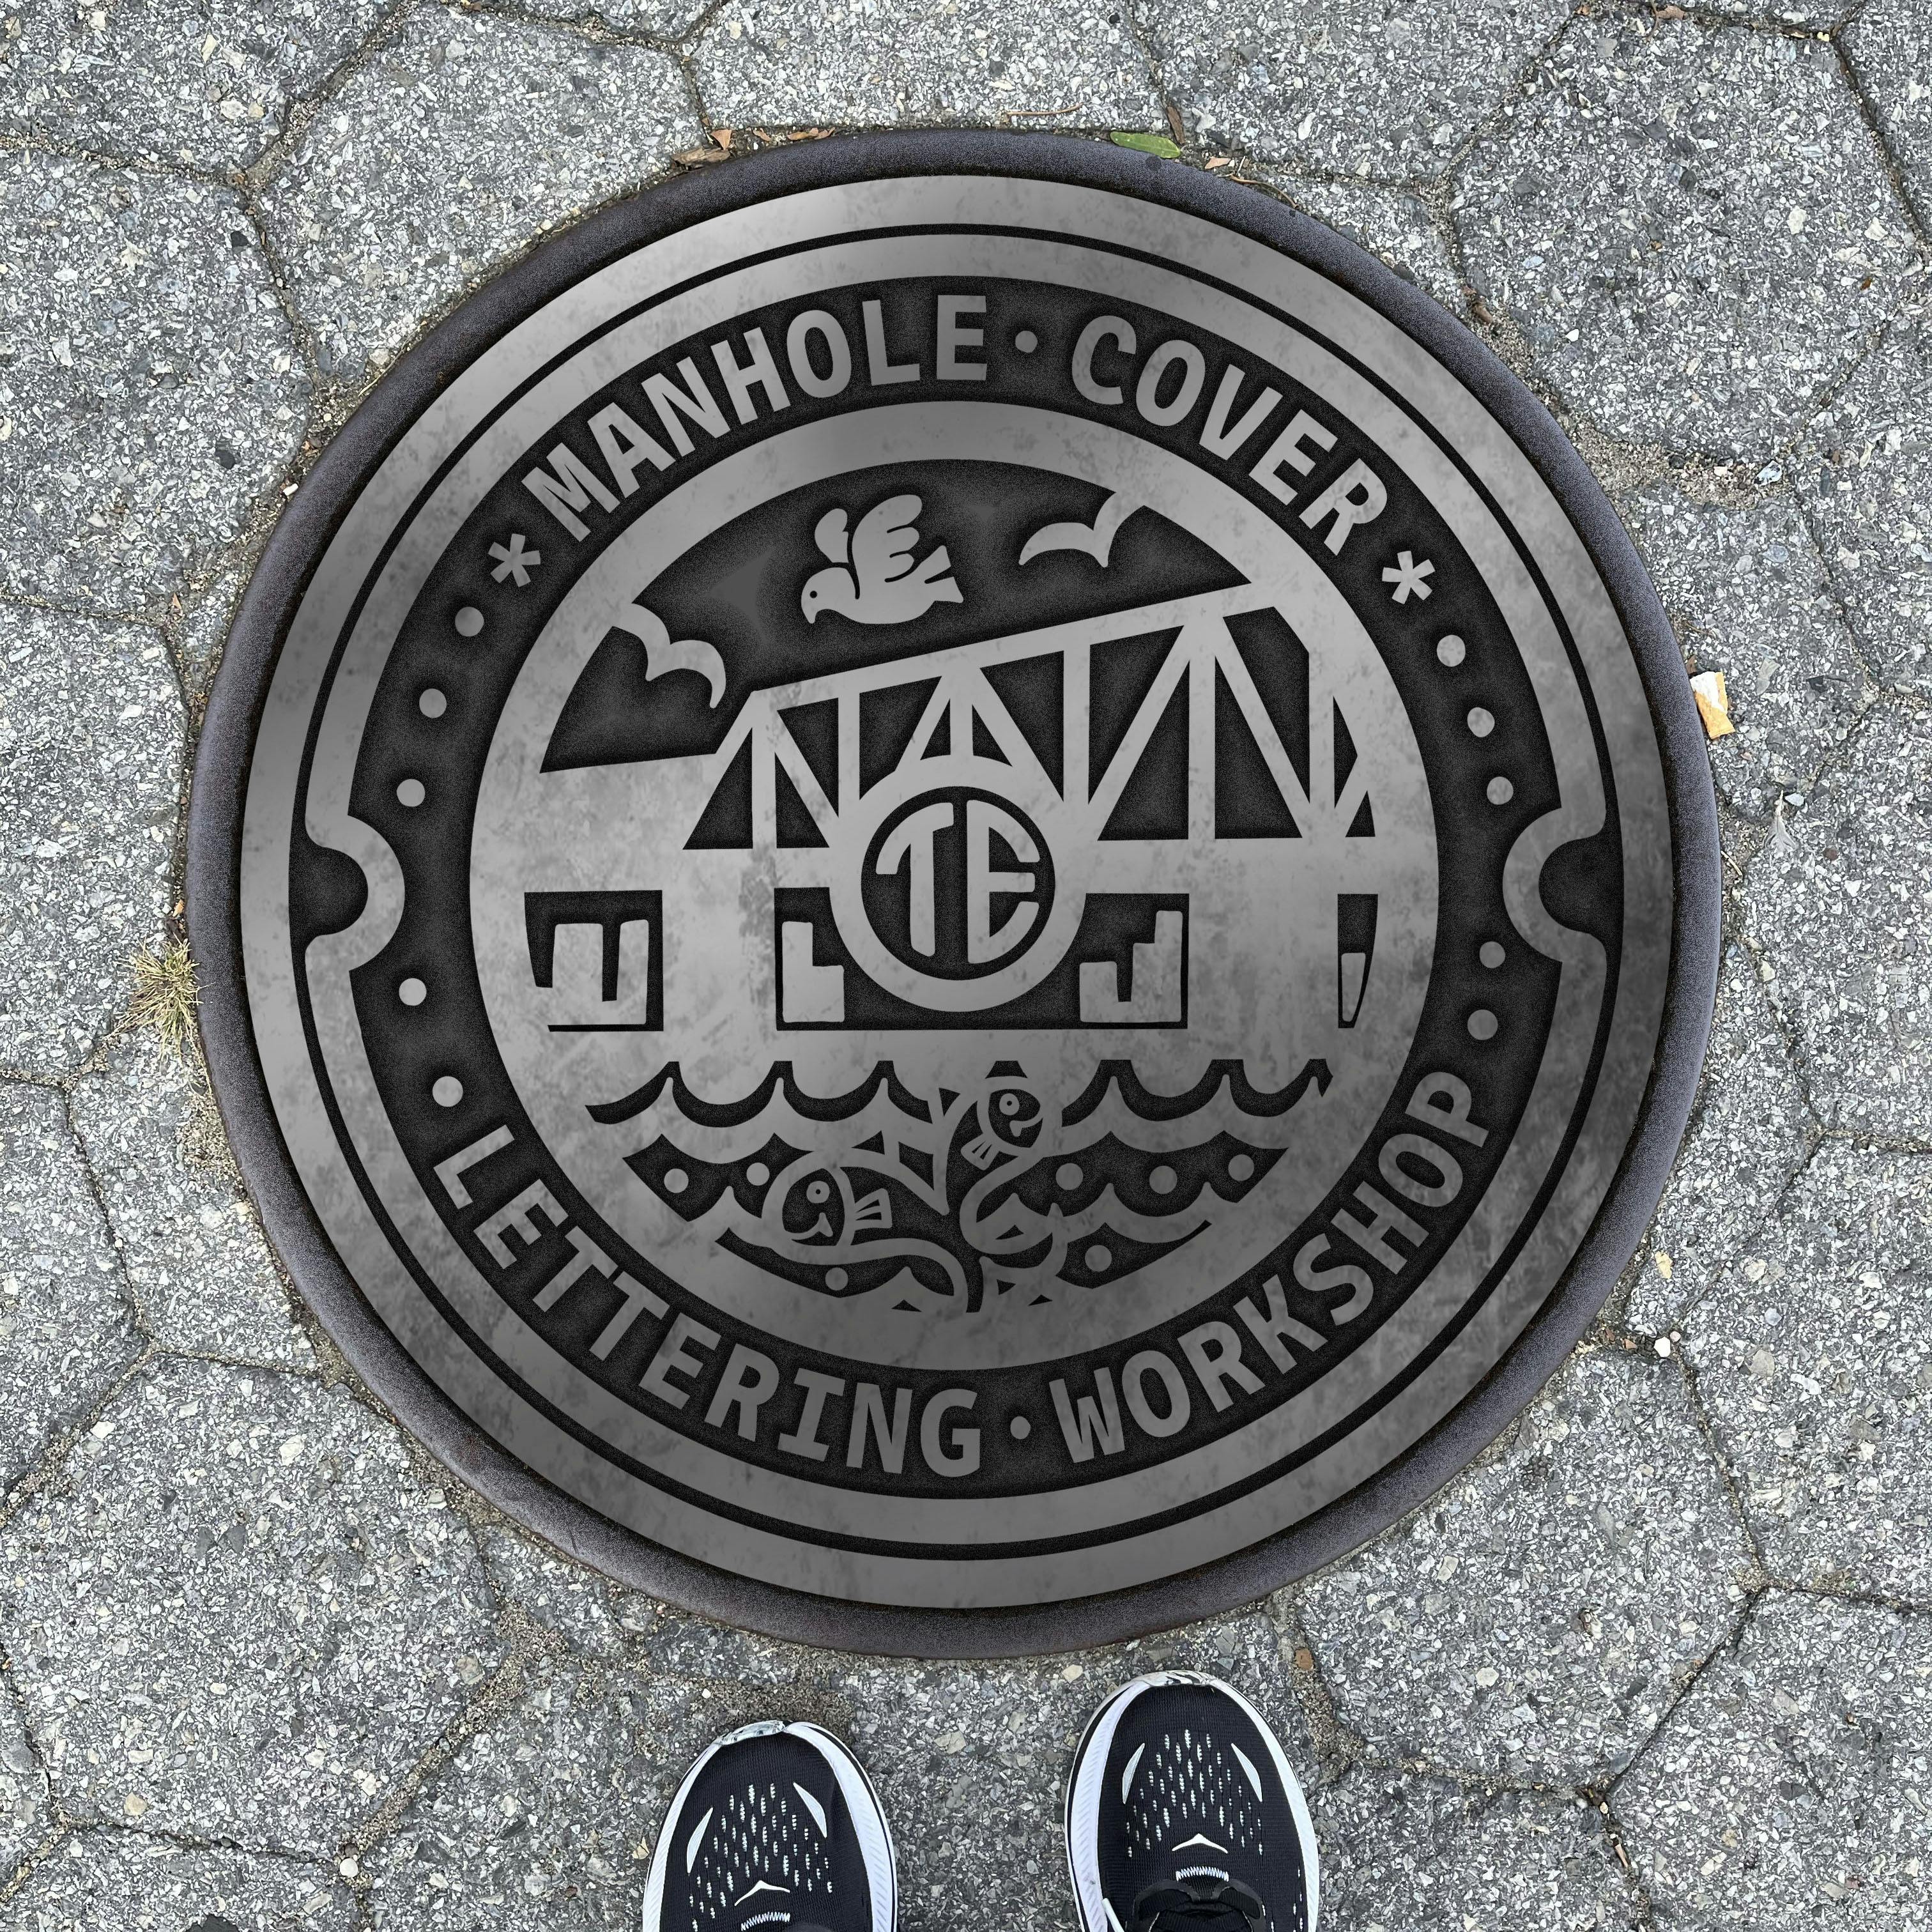 A street floor that has a manhole cover with letters that say "manhole cover lettering workshop" with images of gowanus, brooklyn